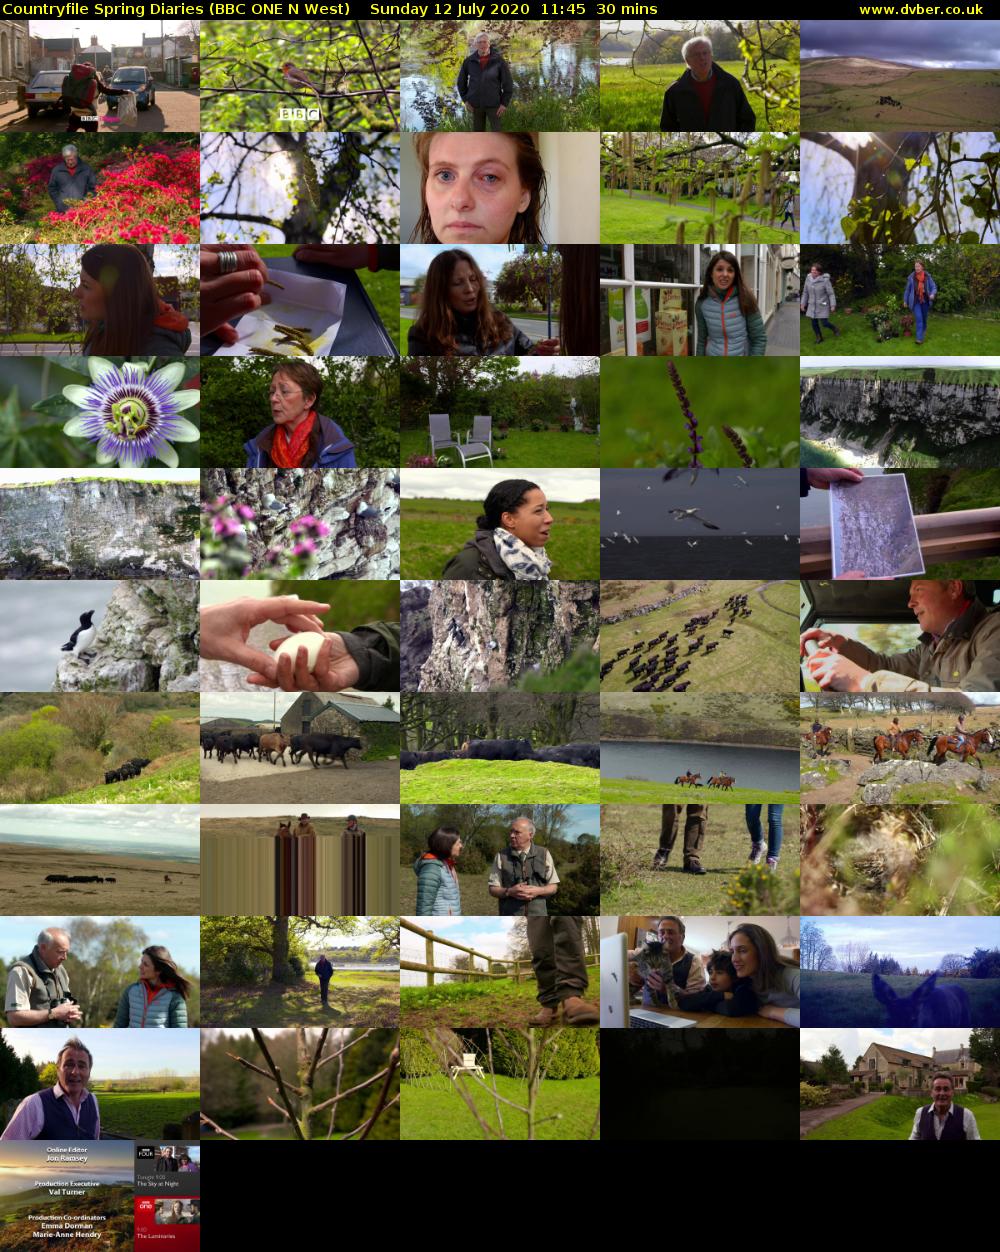 Countryfile Spring Diaries (BBC ONE N West) Sunday 12 July 2020 11:45 - 12:15